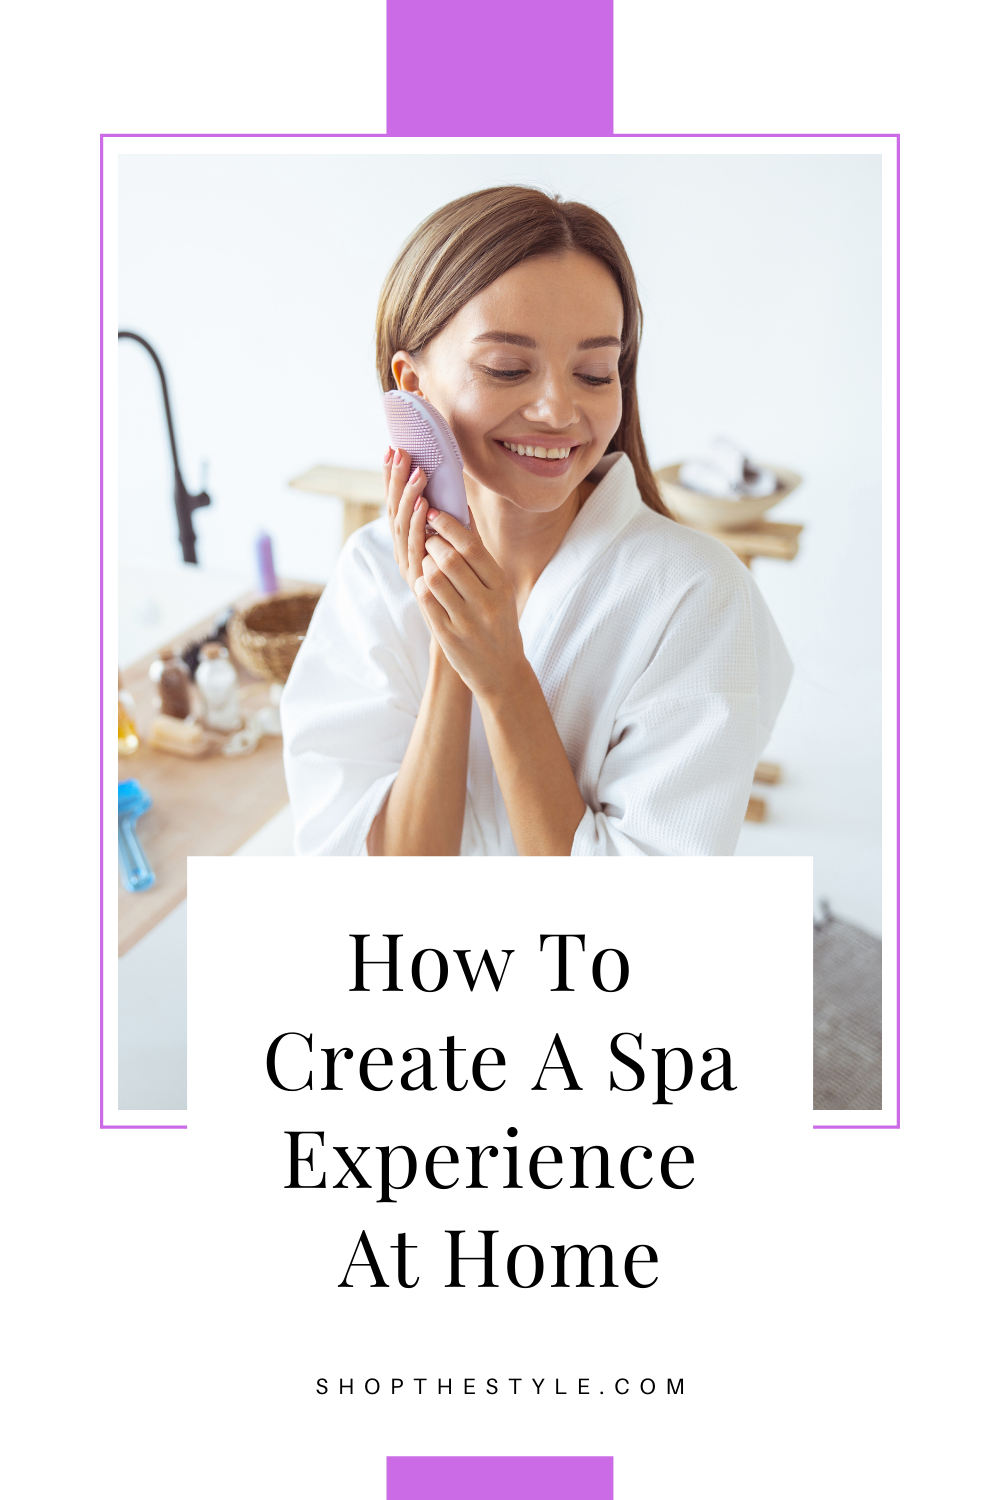 How To Create A Spa Experience At Home